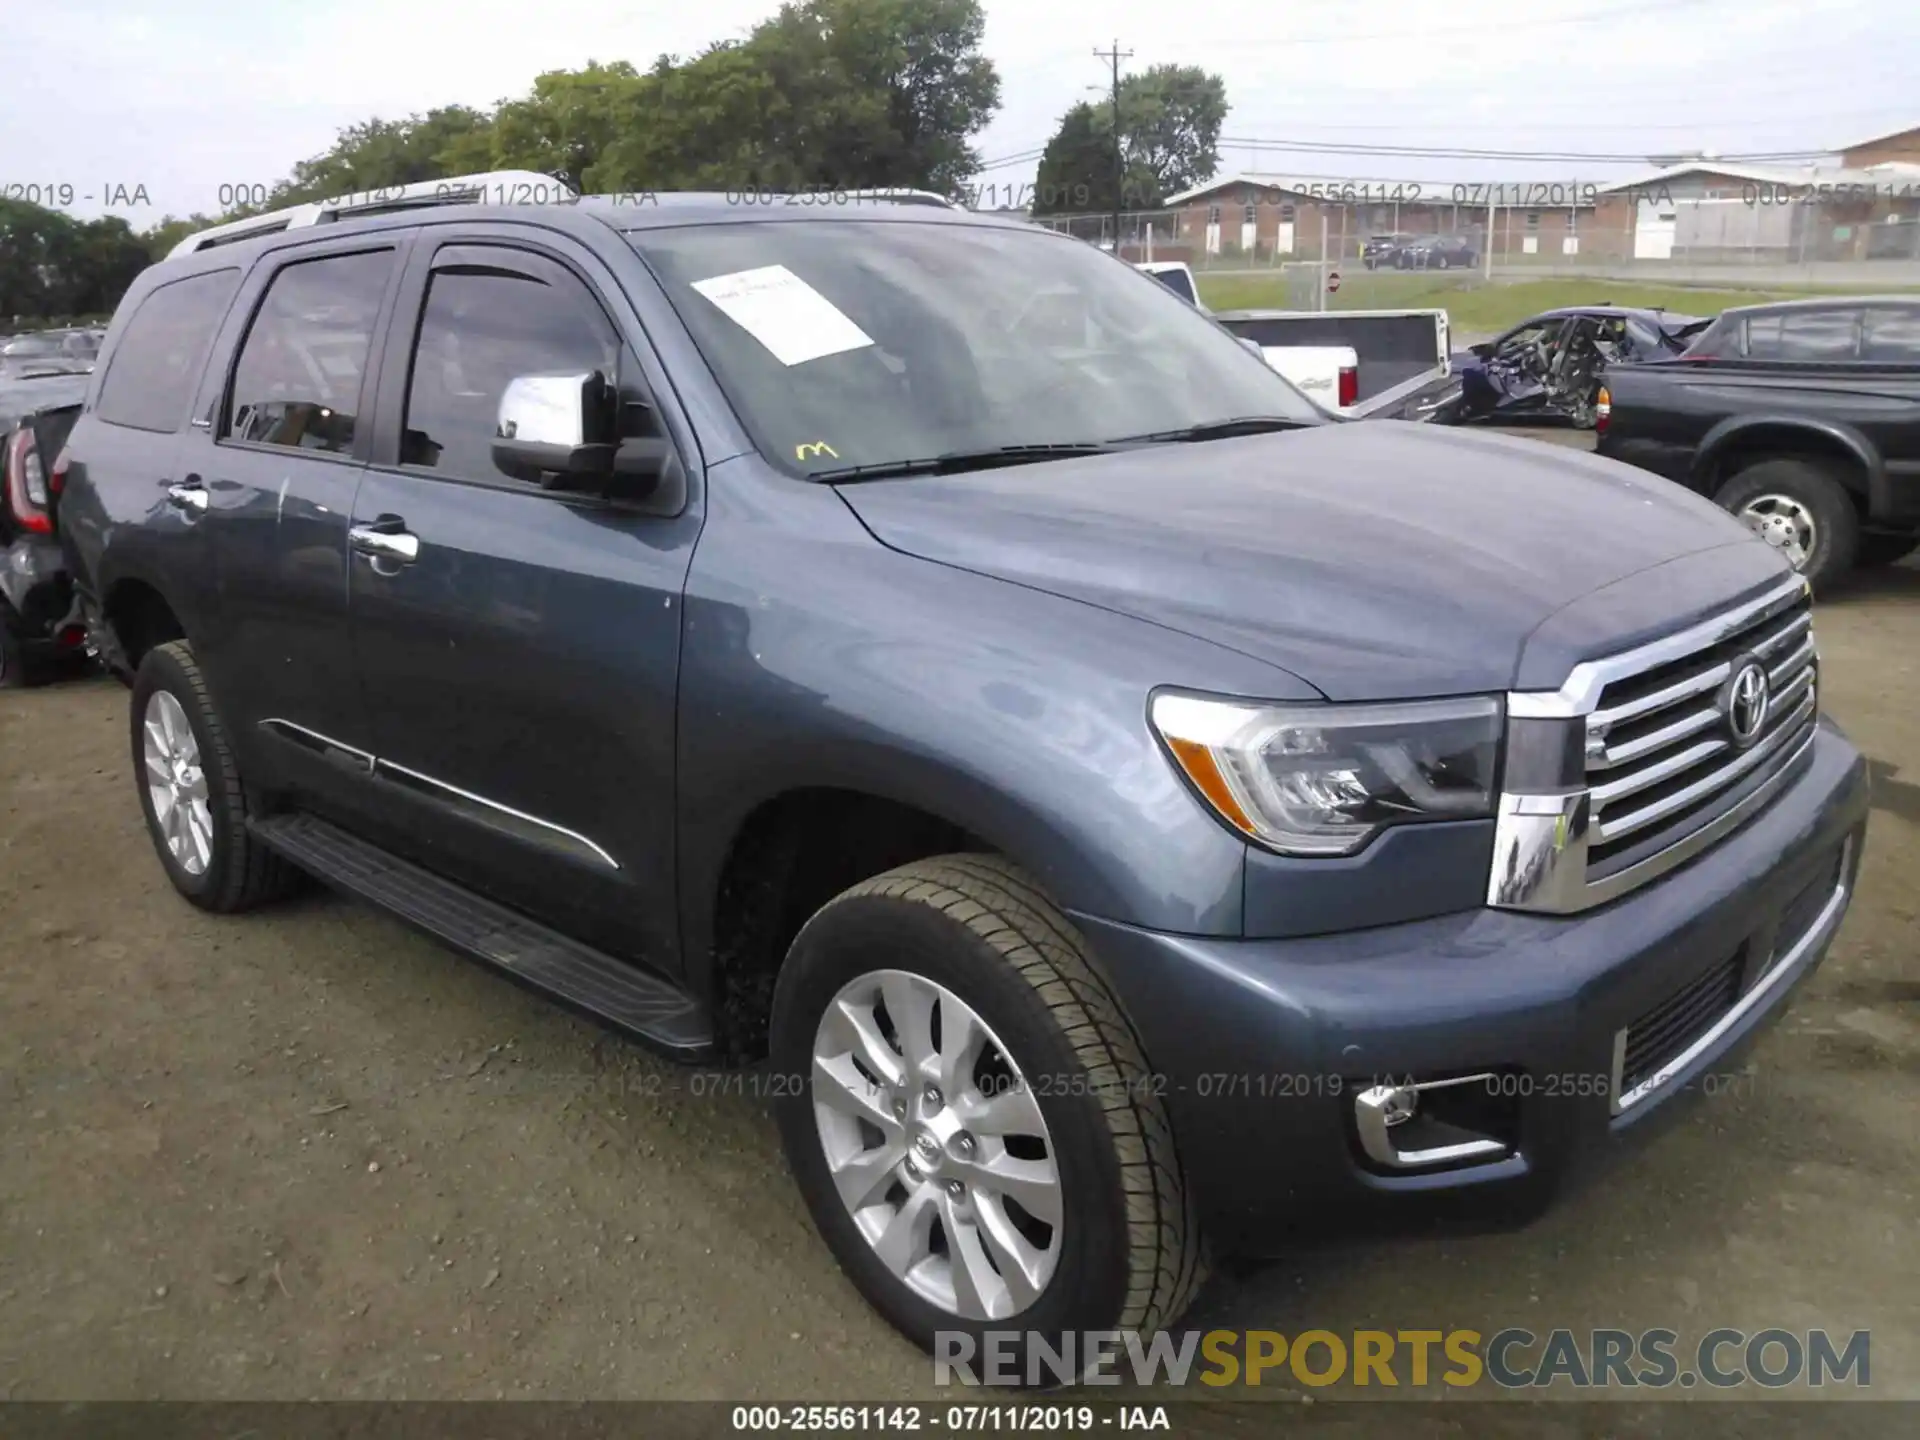 1 Photograph of a damaged car 5TDDY5G19KS165664 TOYOTA SEQUOIA 2019